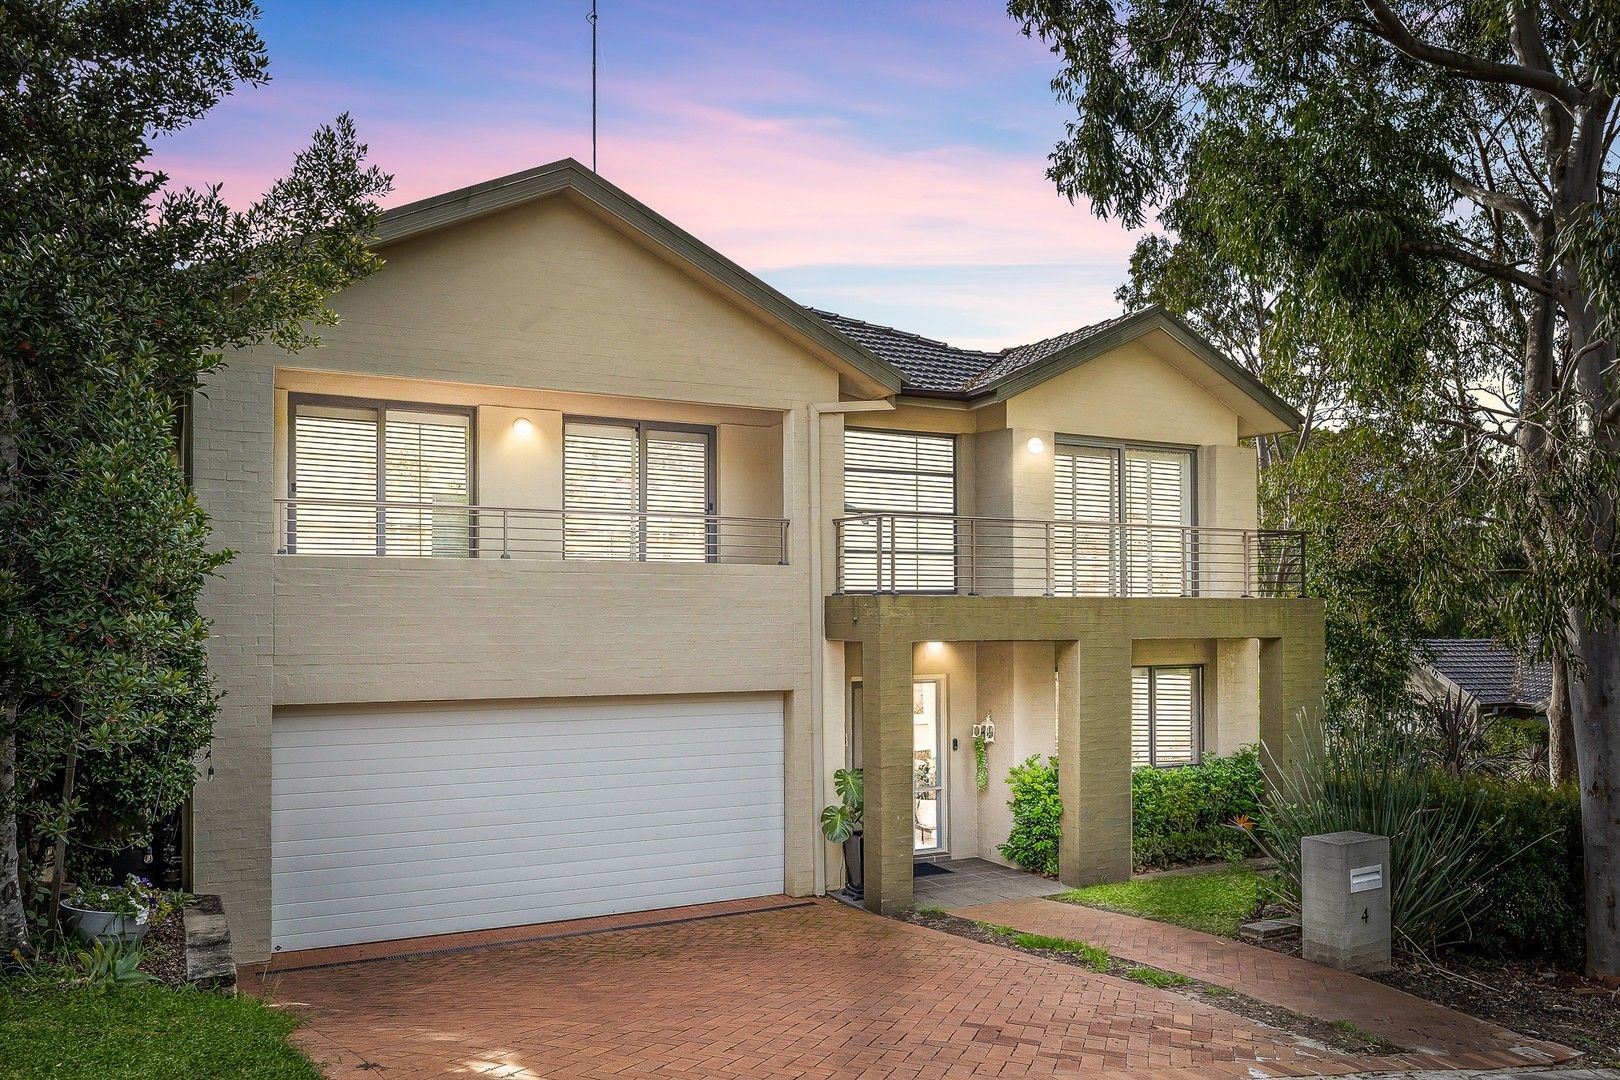 4 Rooms, House, For Sale, Sherbrooke Crescent, 2 Bathrooms, Listing ID 1674, Castle Hill, NSW , Australia, 2154,